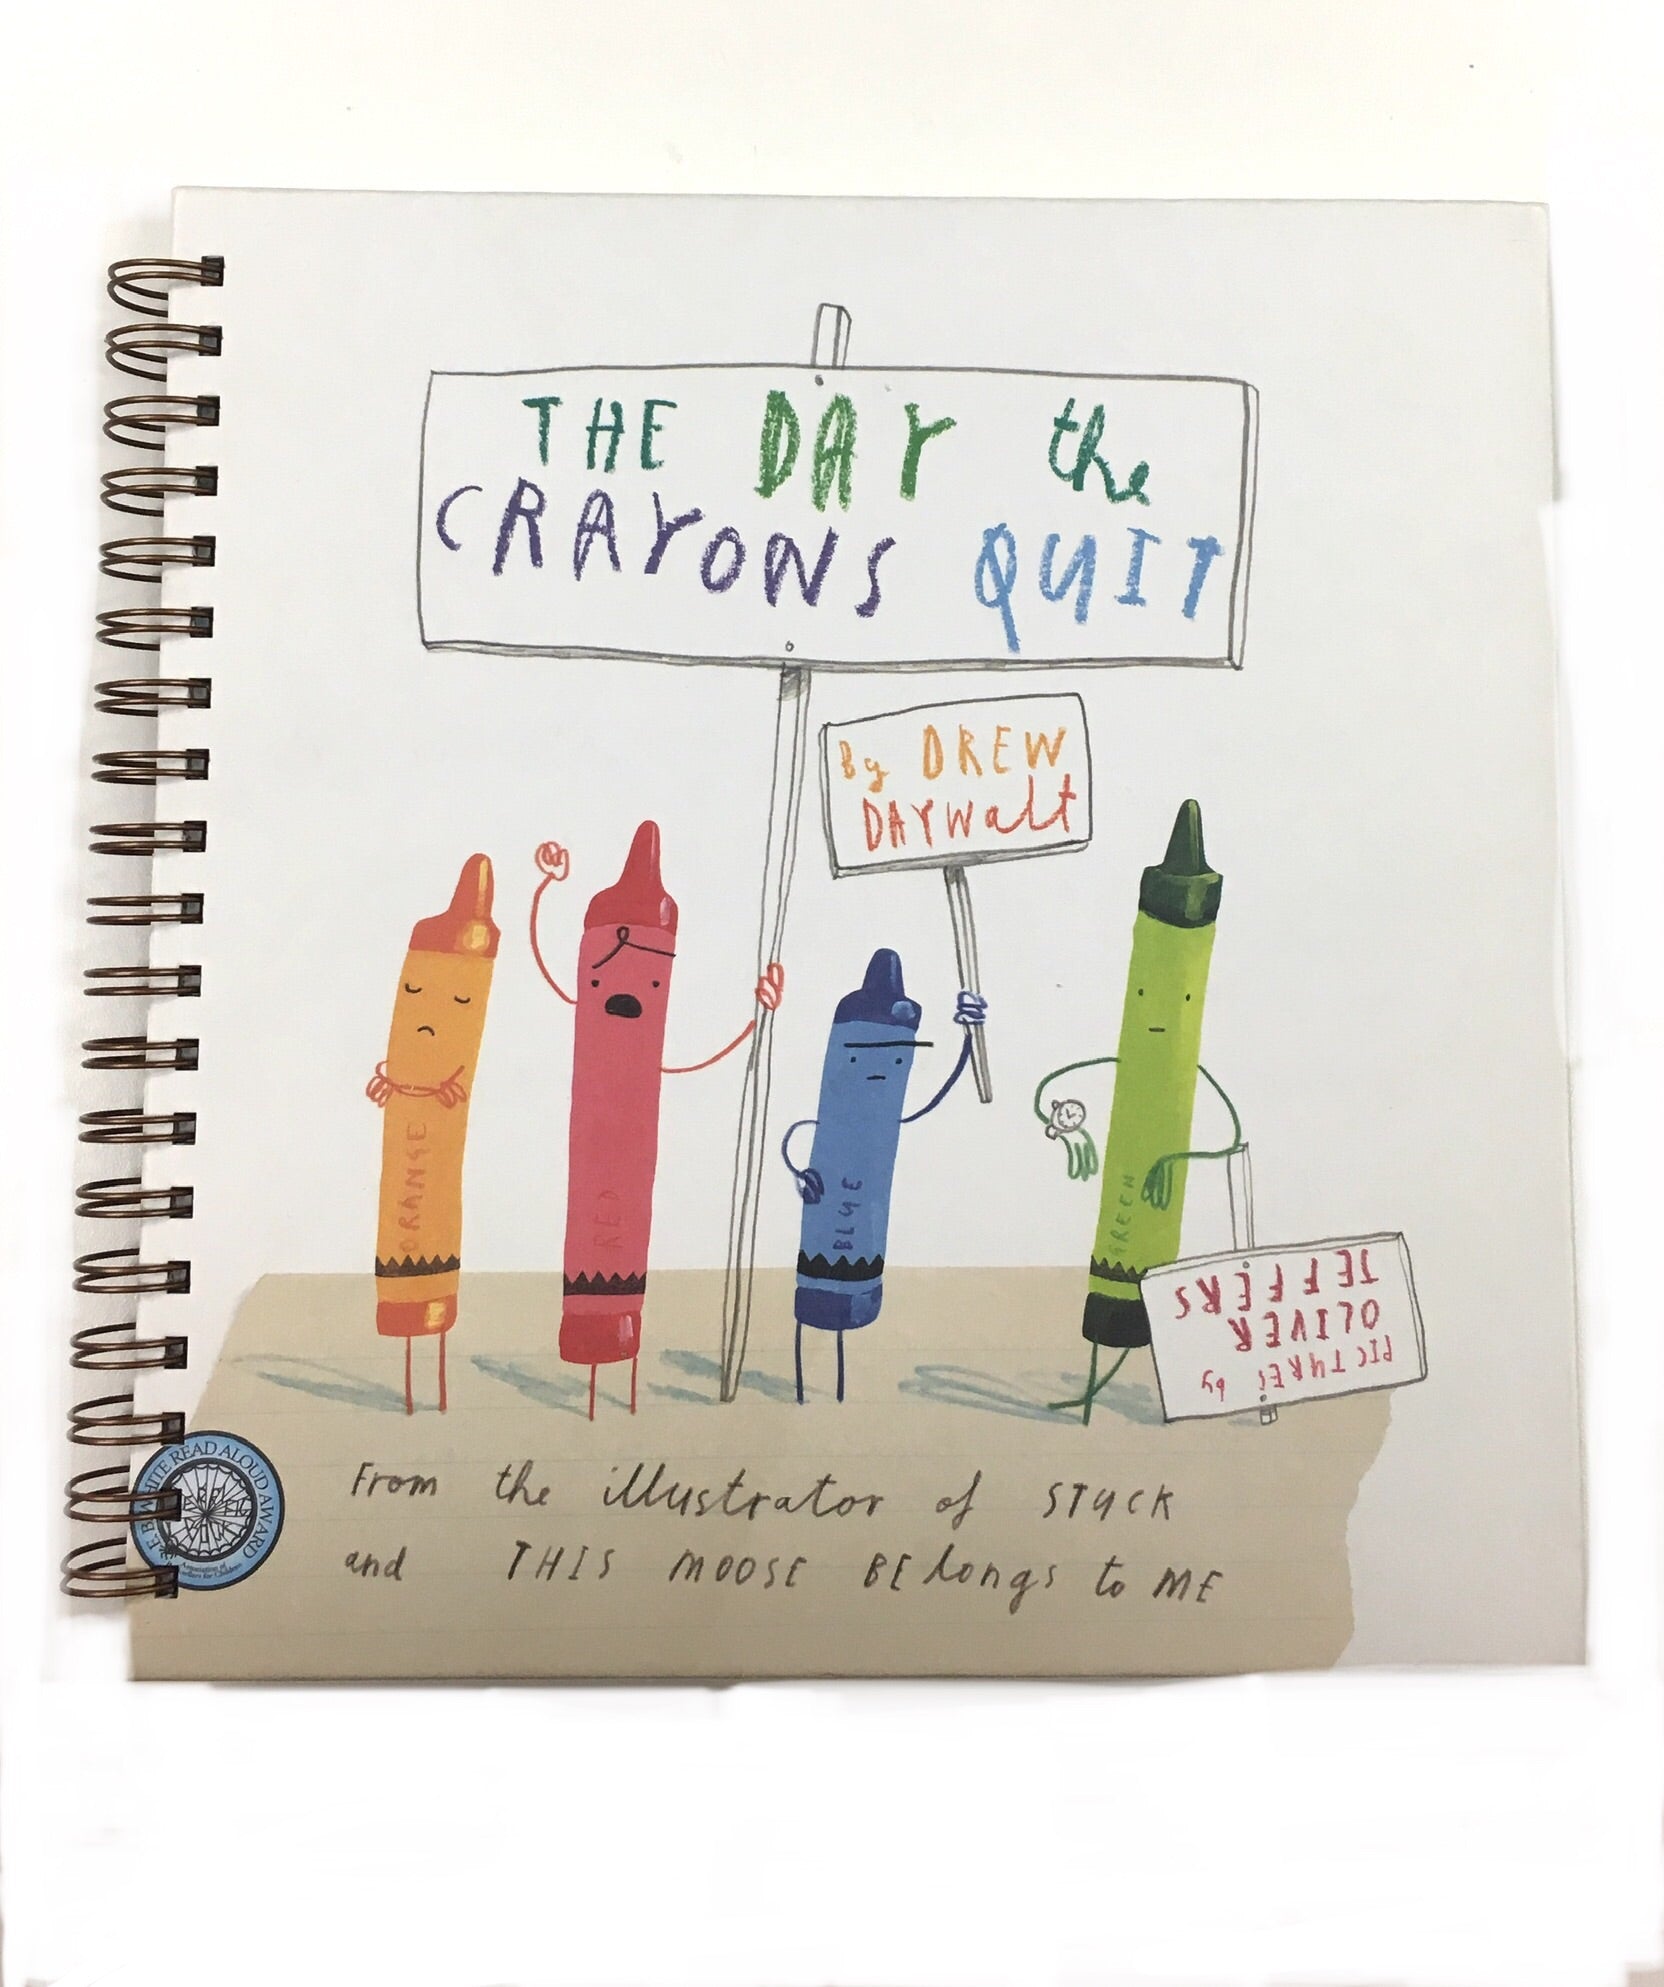 Red: A Crayon's Story. The perfect children's book at the perfect